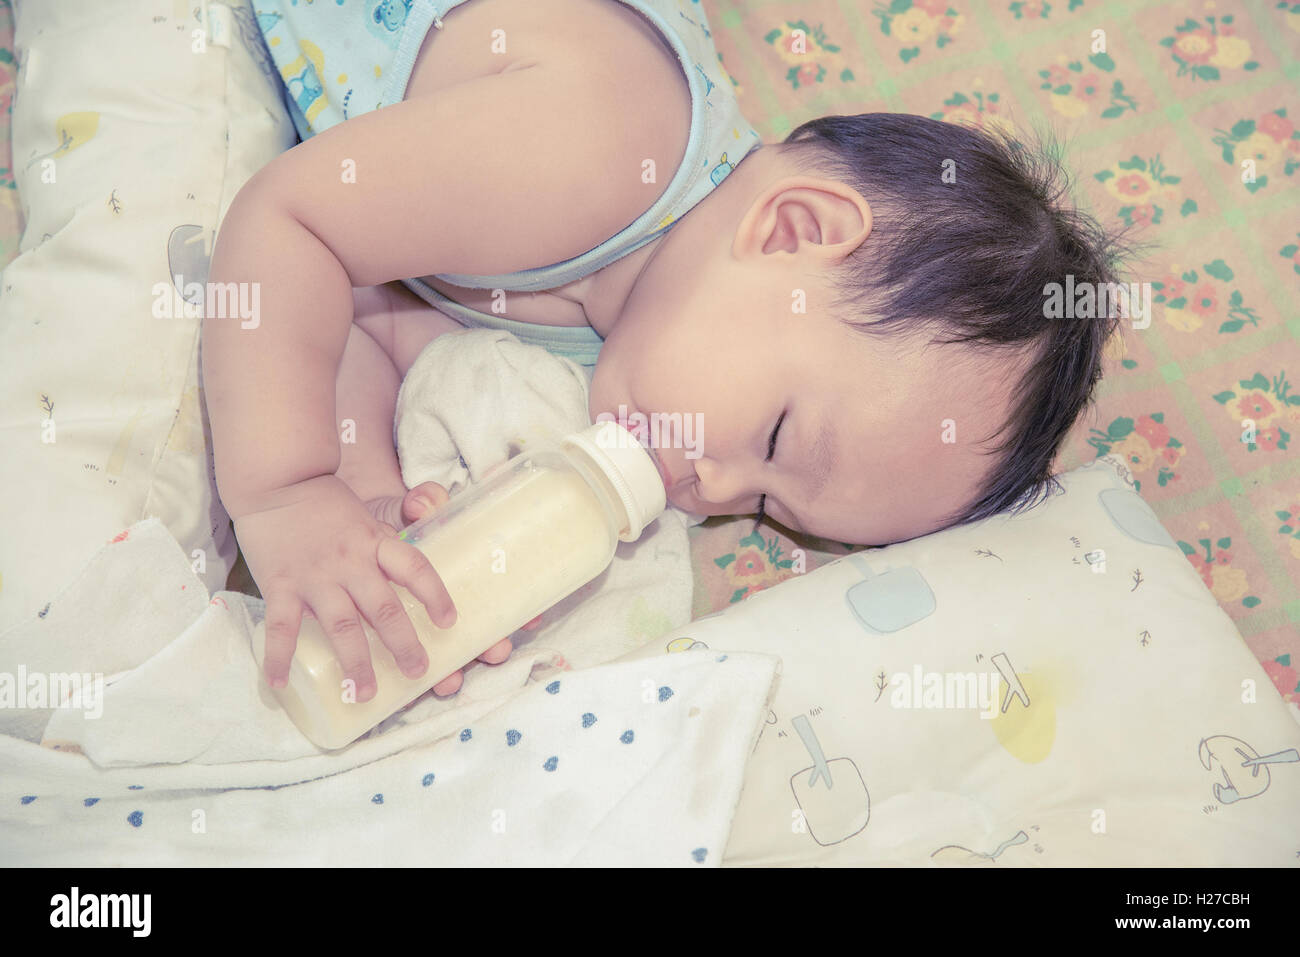 Asian baby sleeping and drinking milk from the bottle Stock Photo